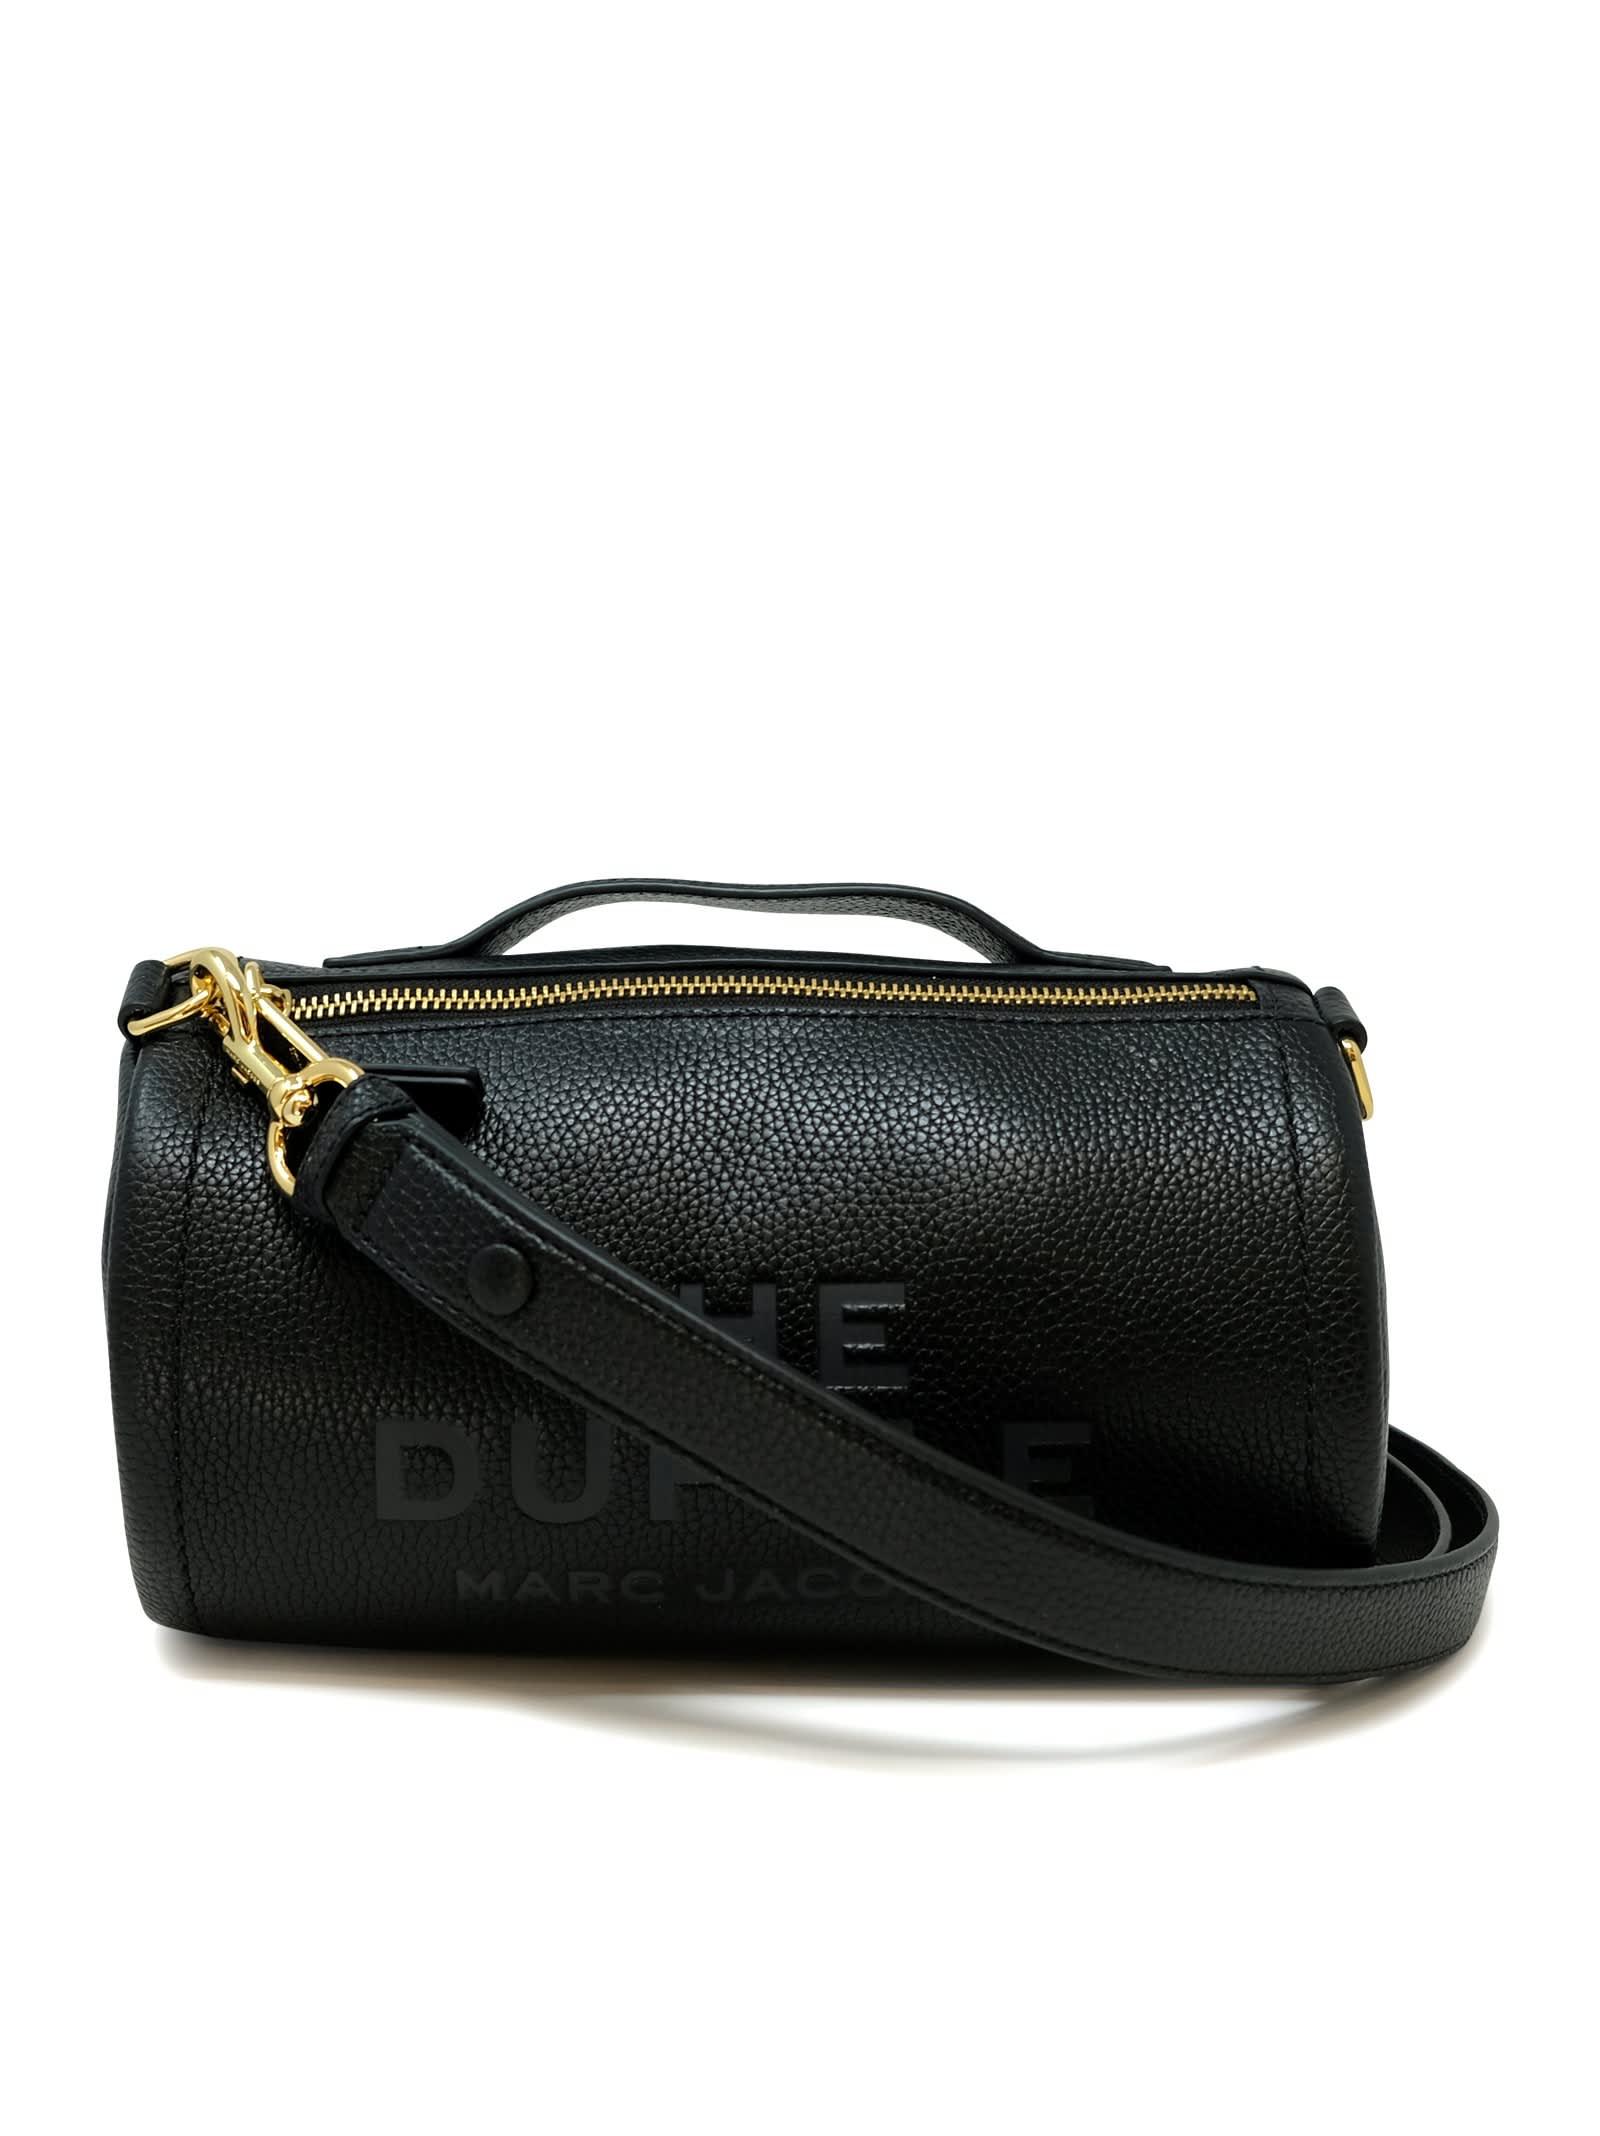 The Duffle Leather Shoulder Bag in Black - Marc Jacobs